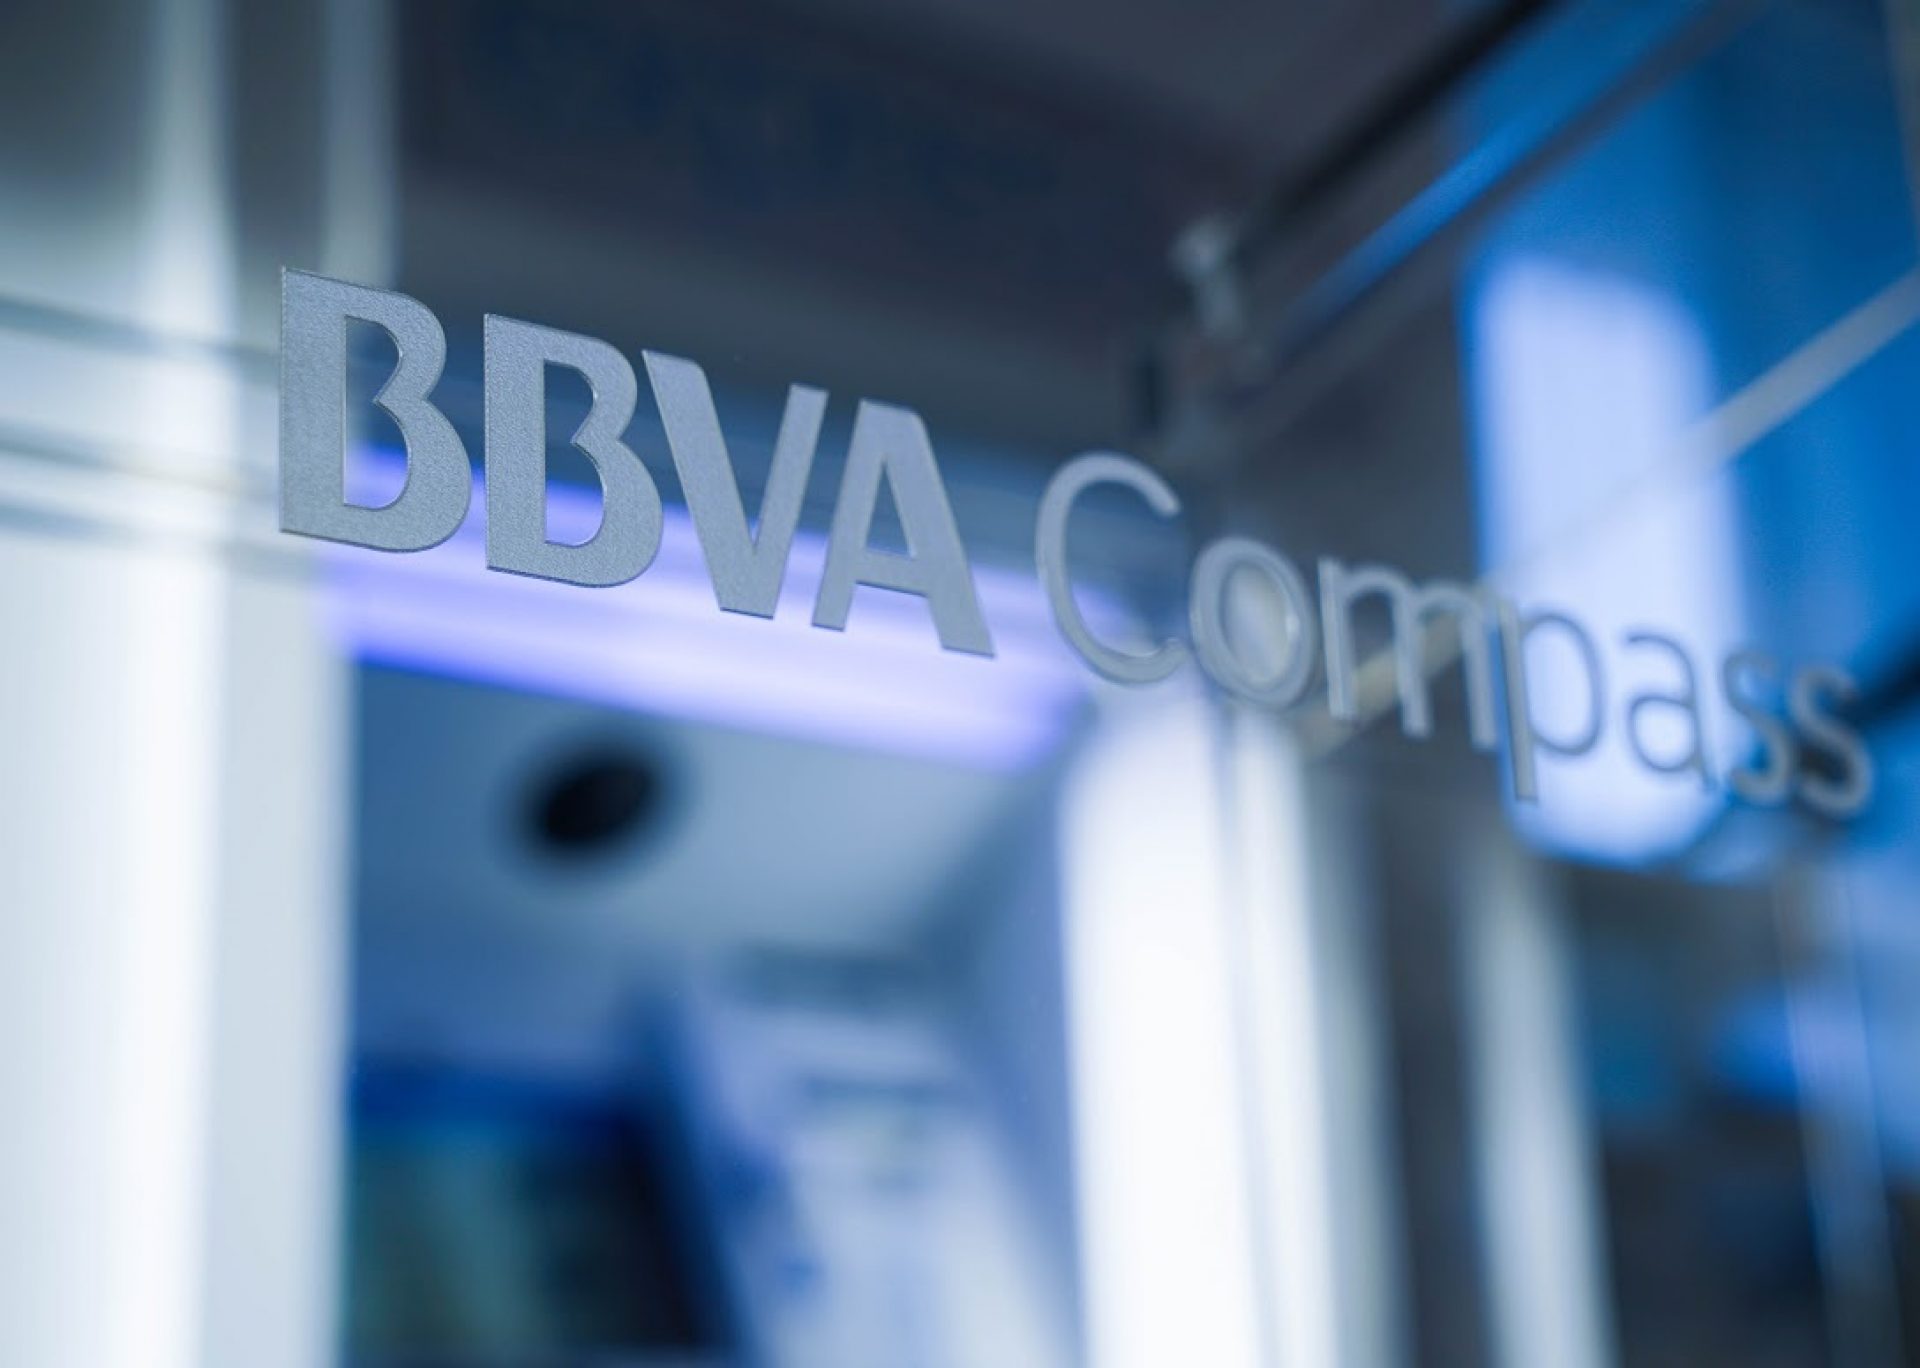 BBVA Compass reports net income of $121 million for the first quarter